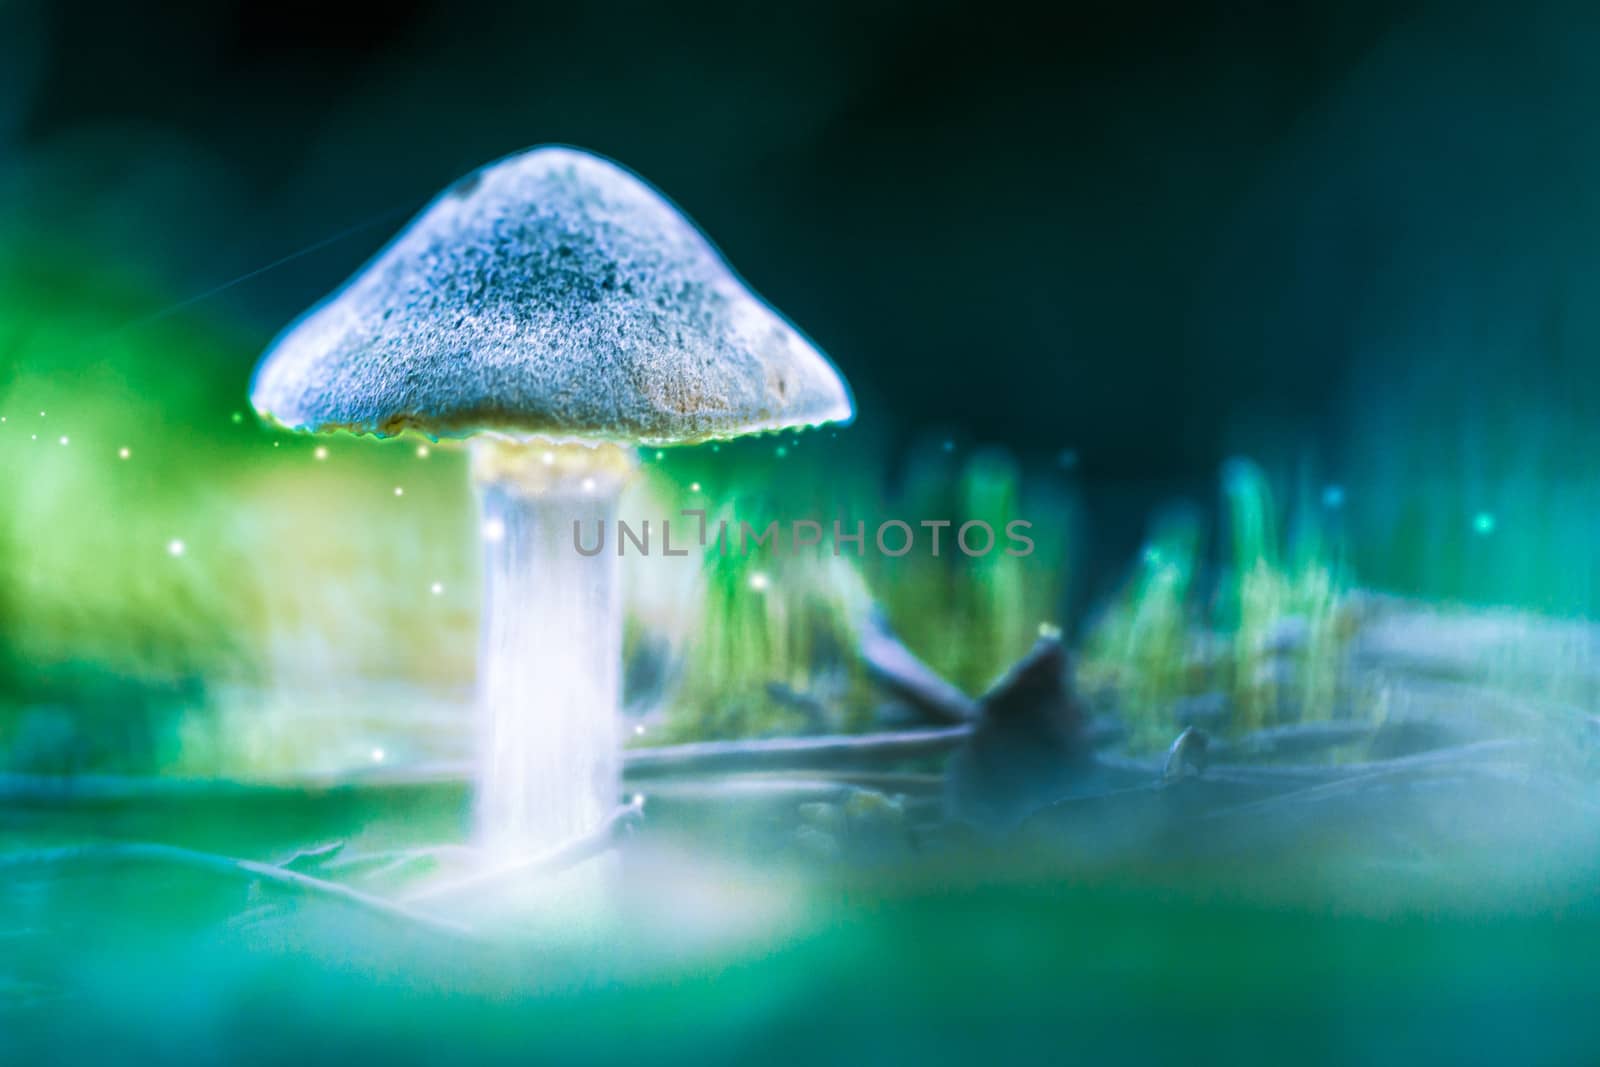 Mushroom with glowing spores. Shallow depth of field